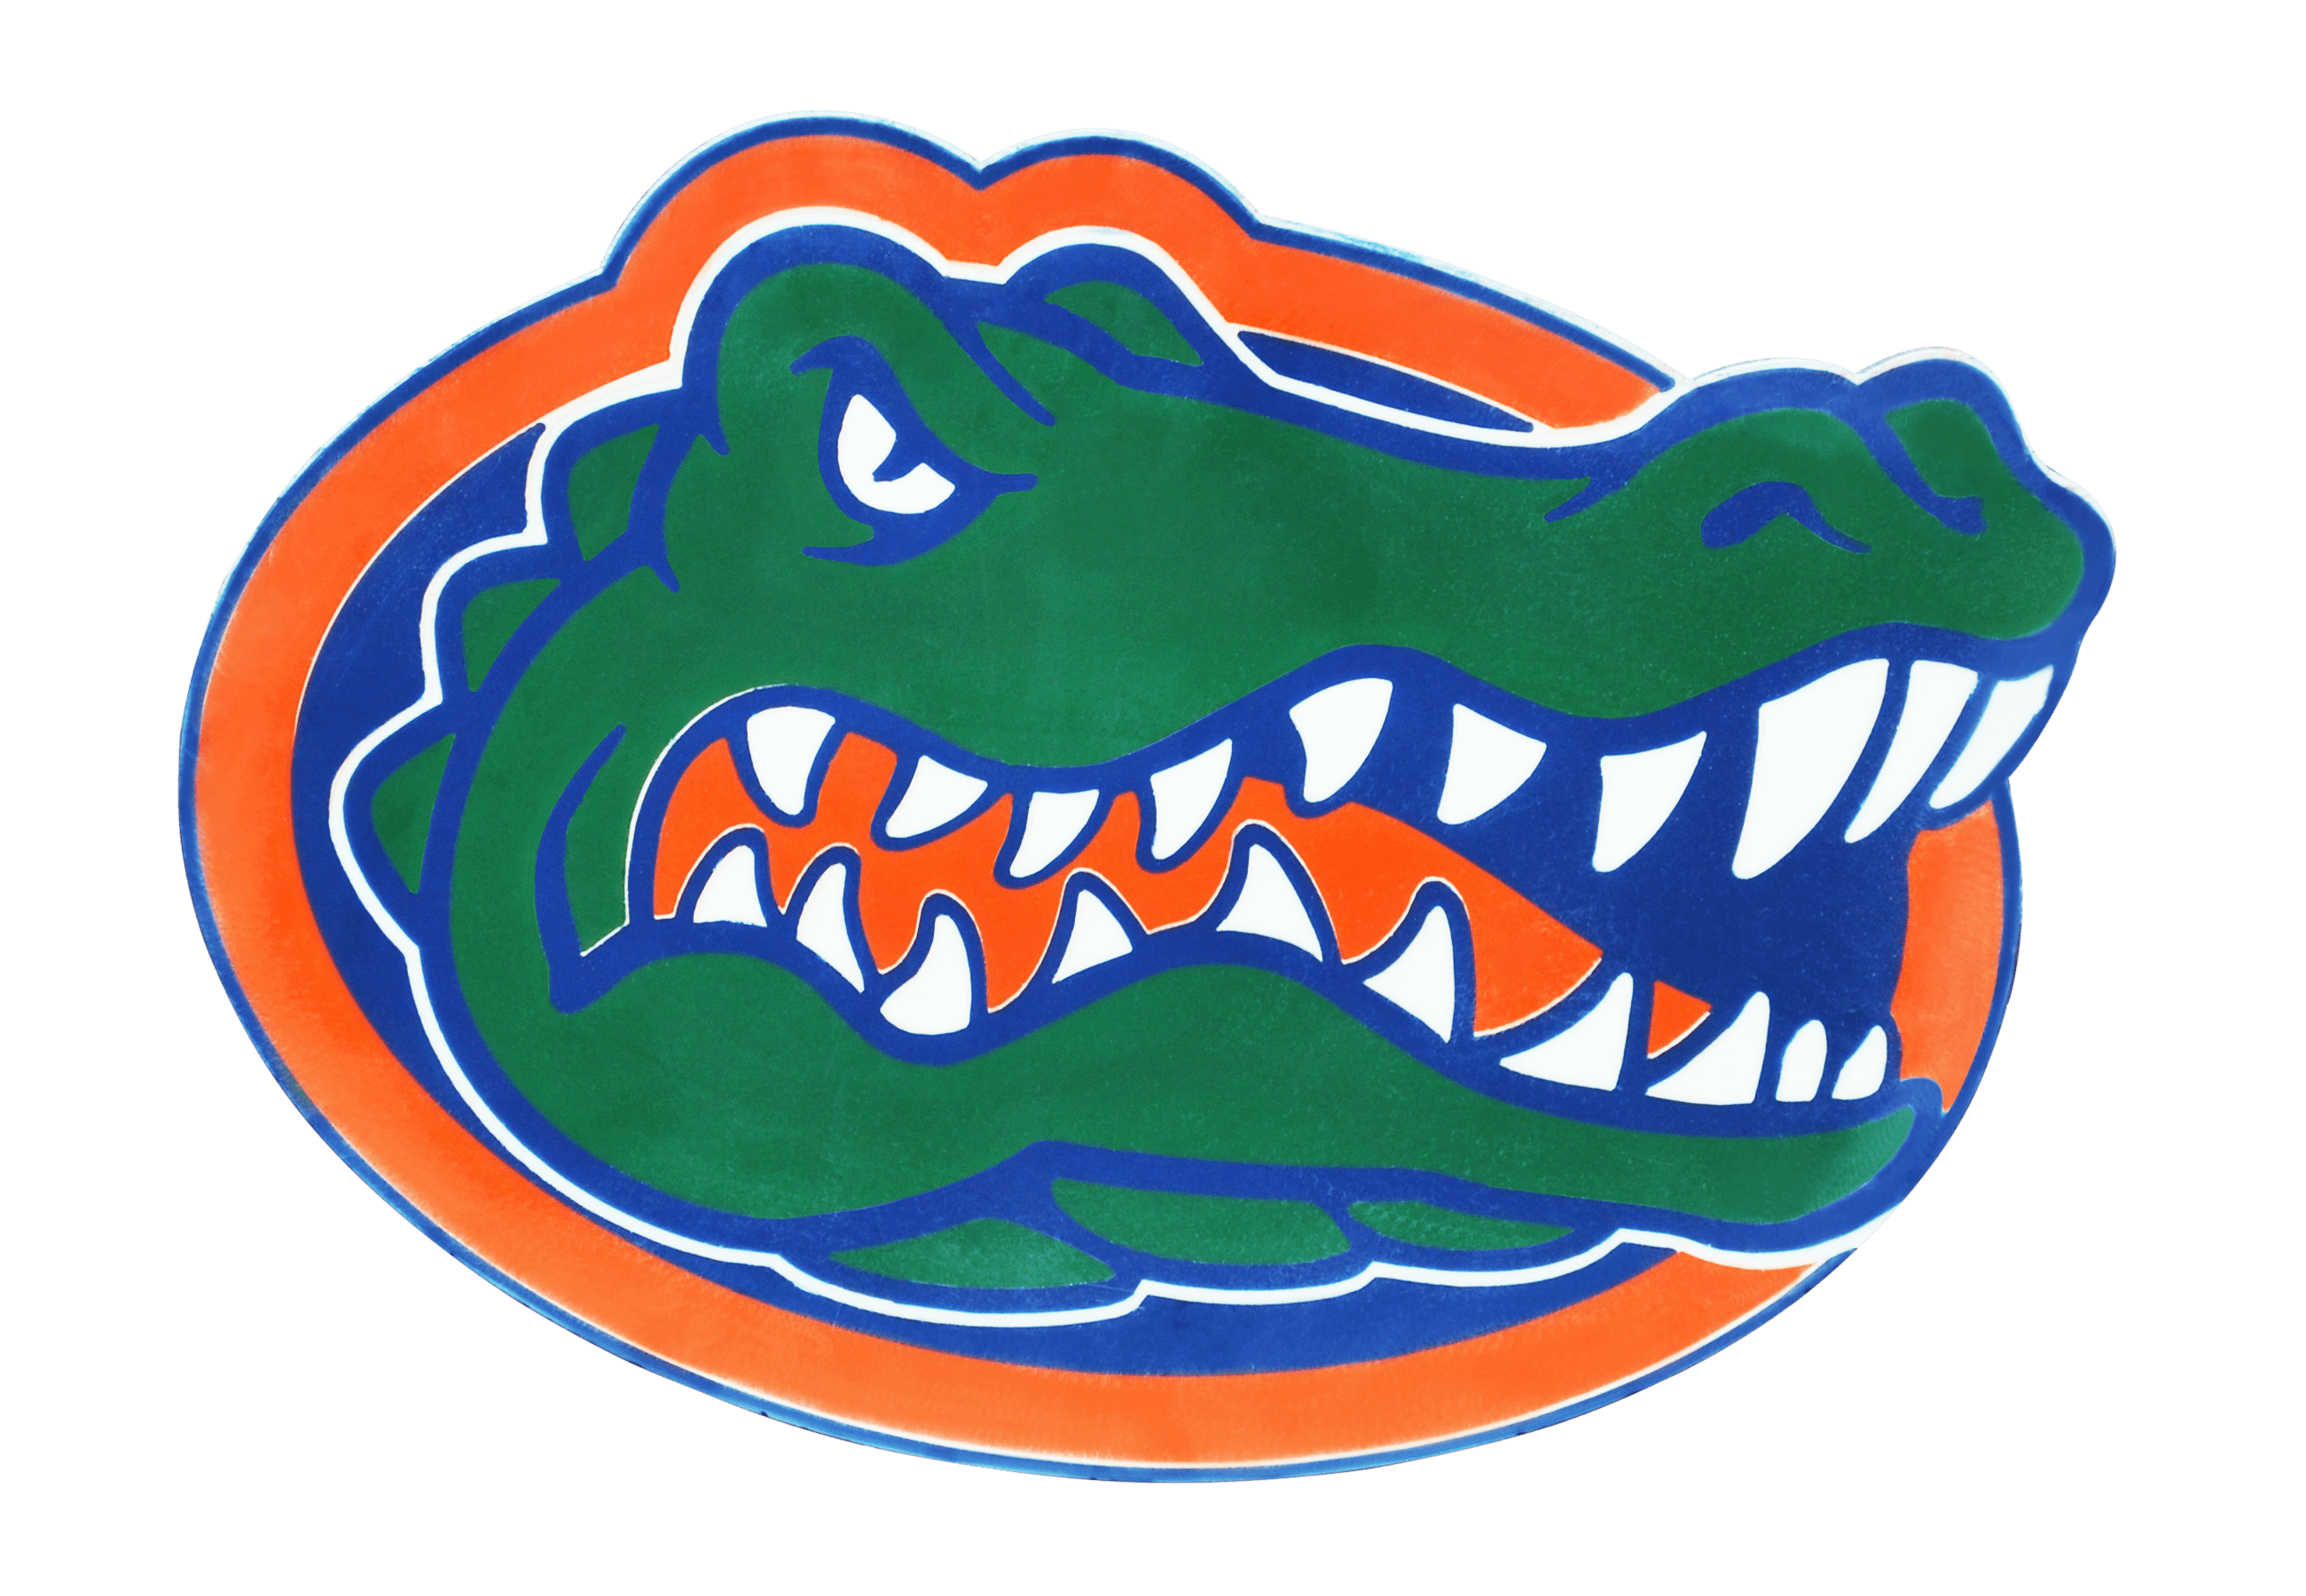 Florida Logo - Florida Gators Logo, Florida Gators Symbol, Meaning, History and ...